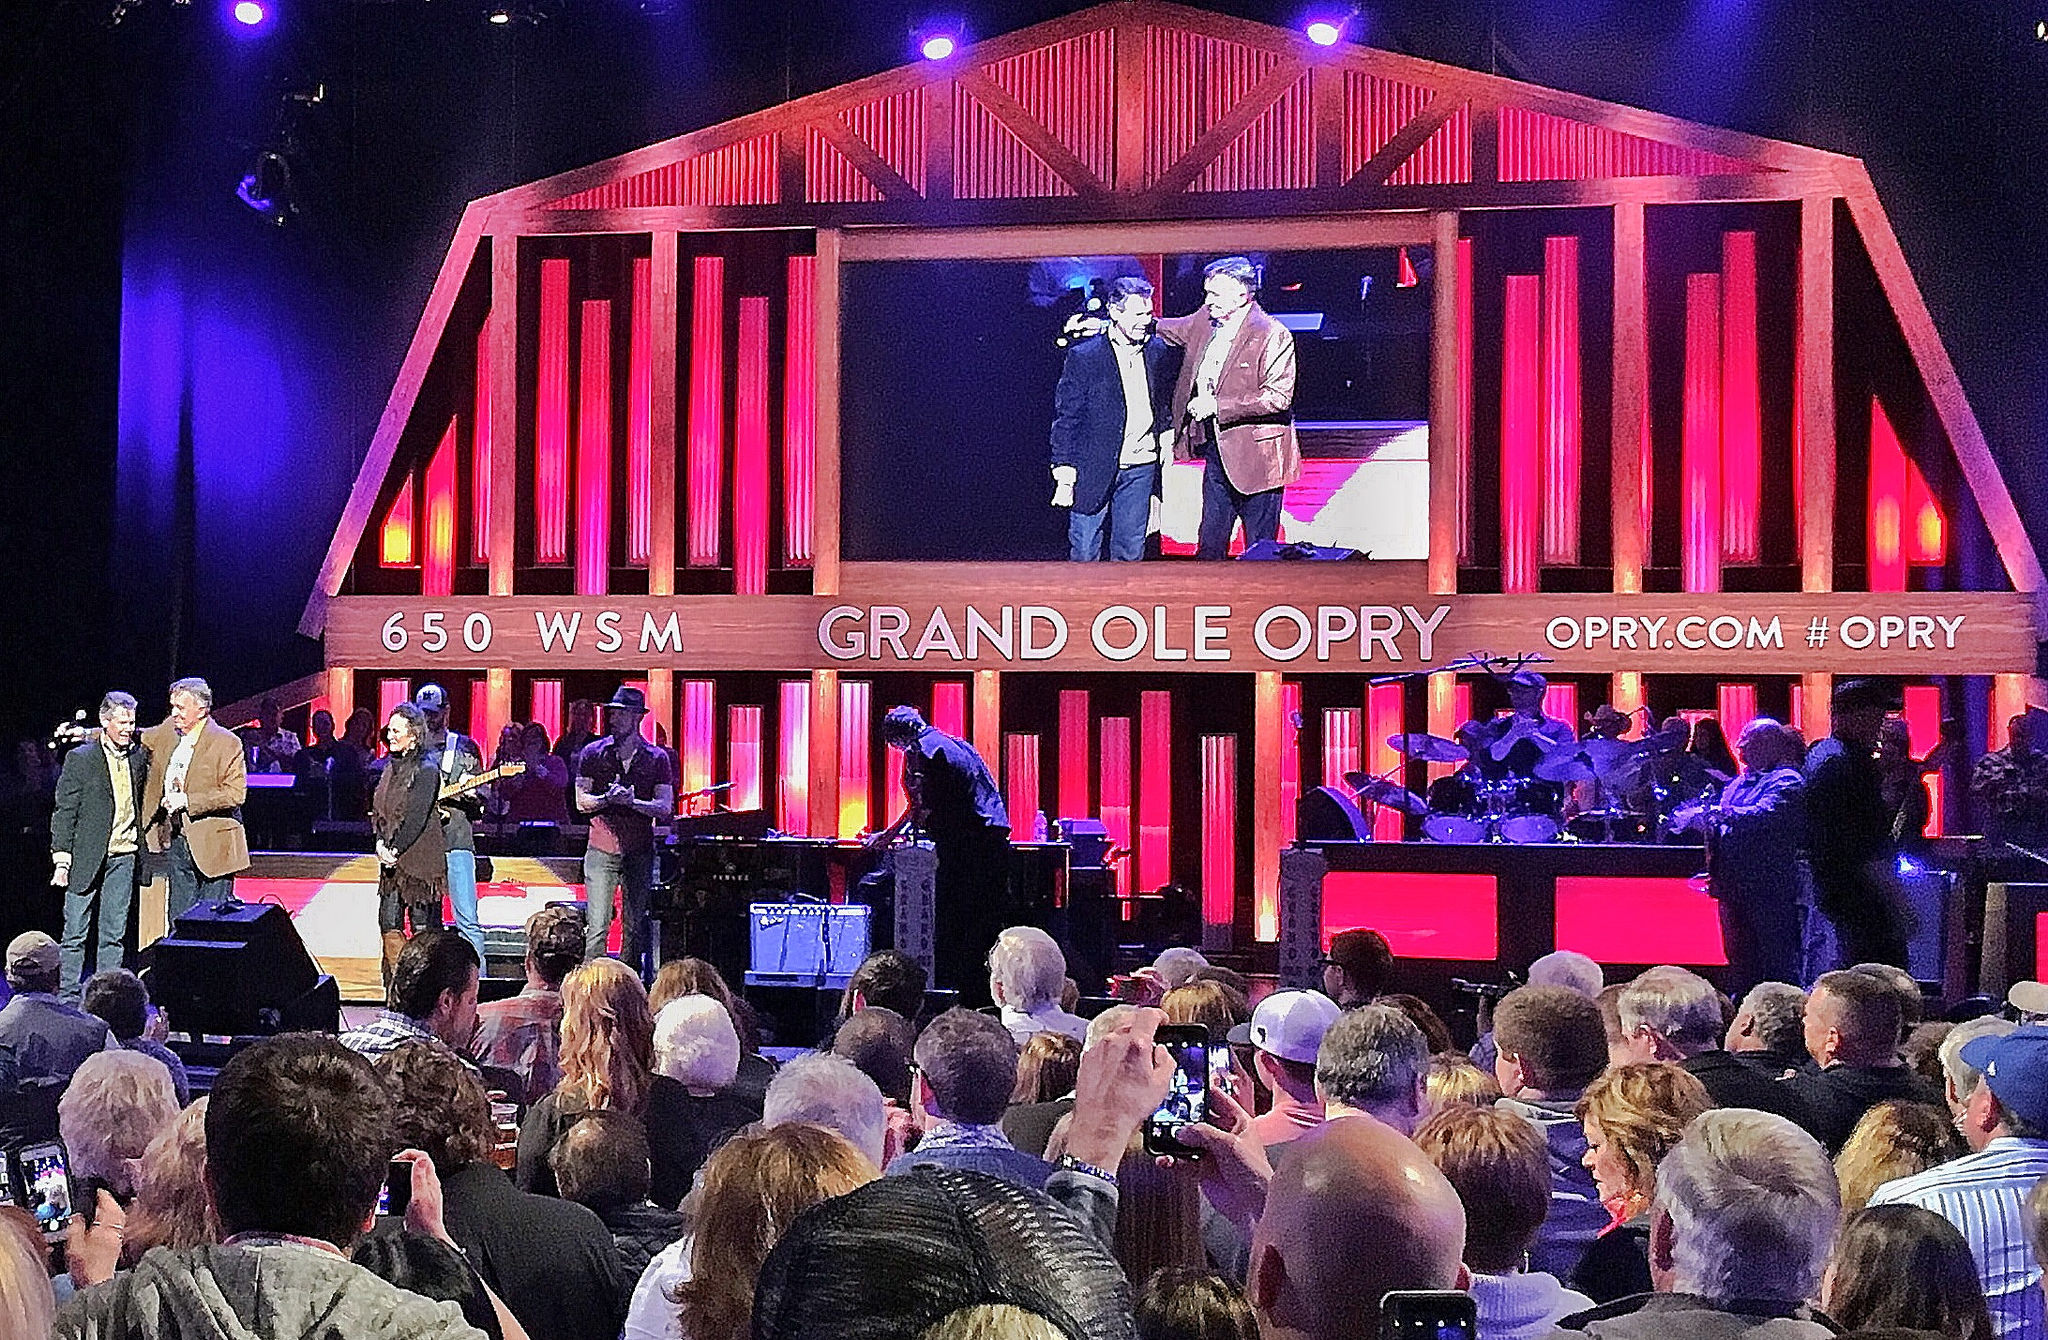 The Grand Ole Opry: Fun for the Whole Family2048 x 1340